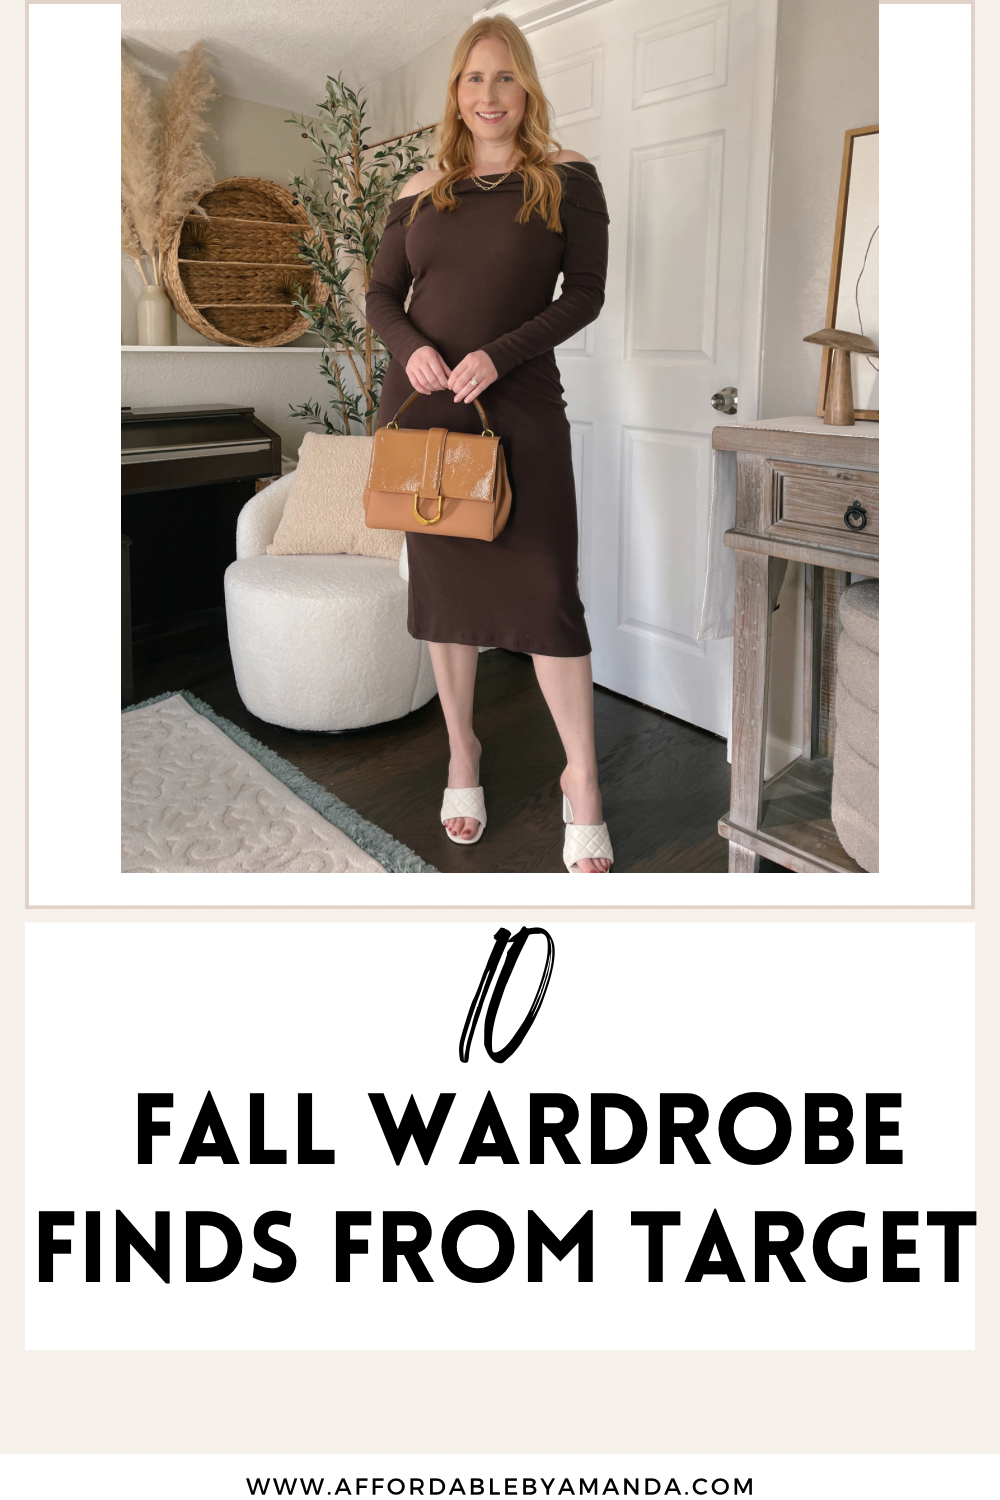 10 Fall Wardrobe Finds From Target - Affordable by Amanda